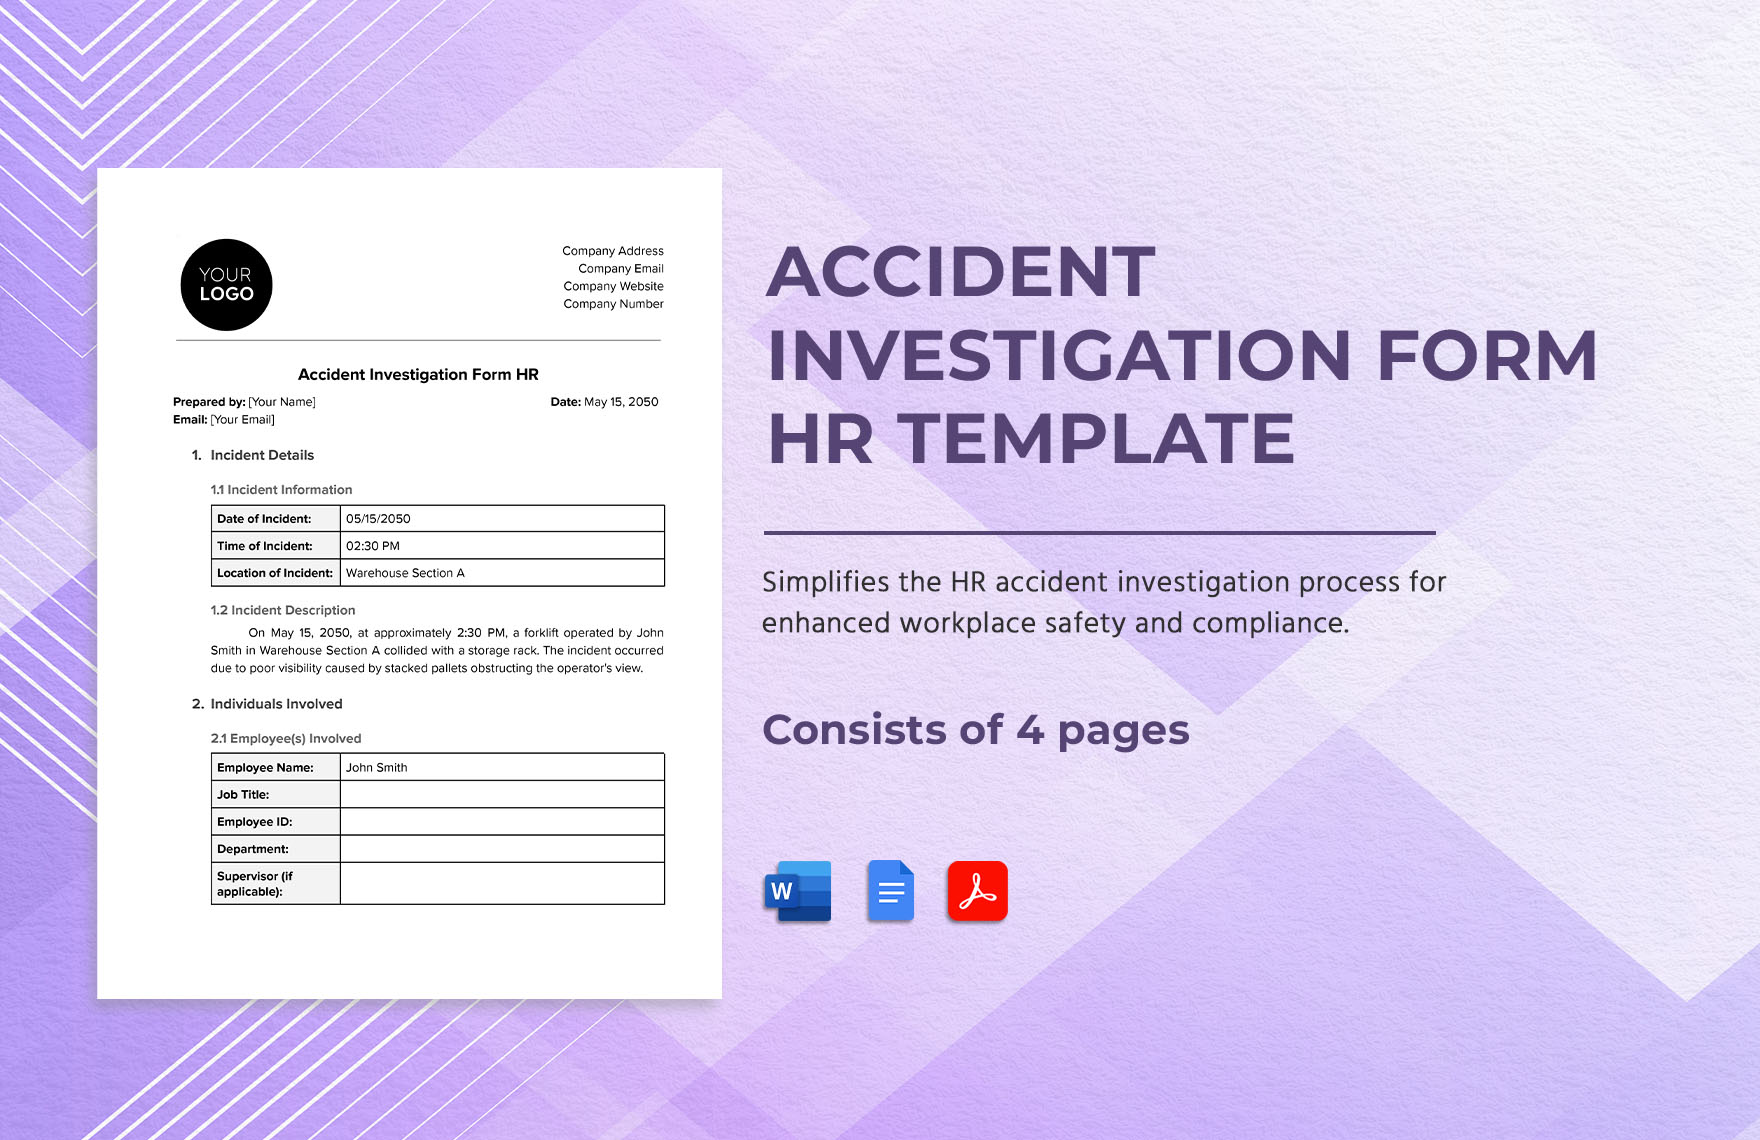 Accident Investigation Form HR Template in Word, Google Docs, PDF